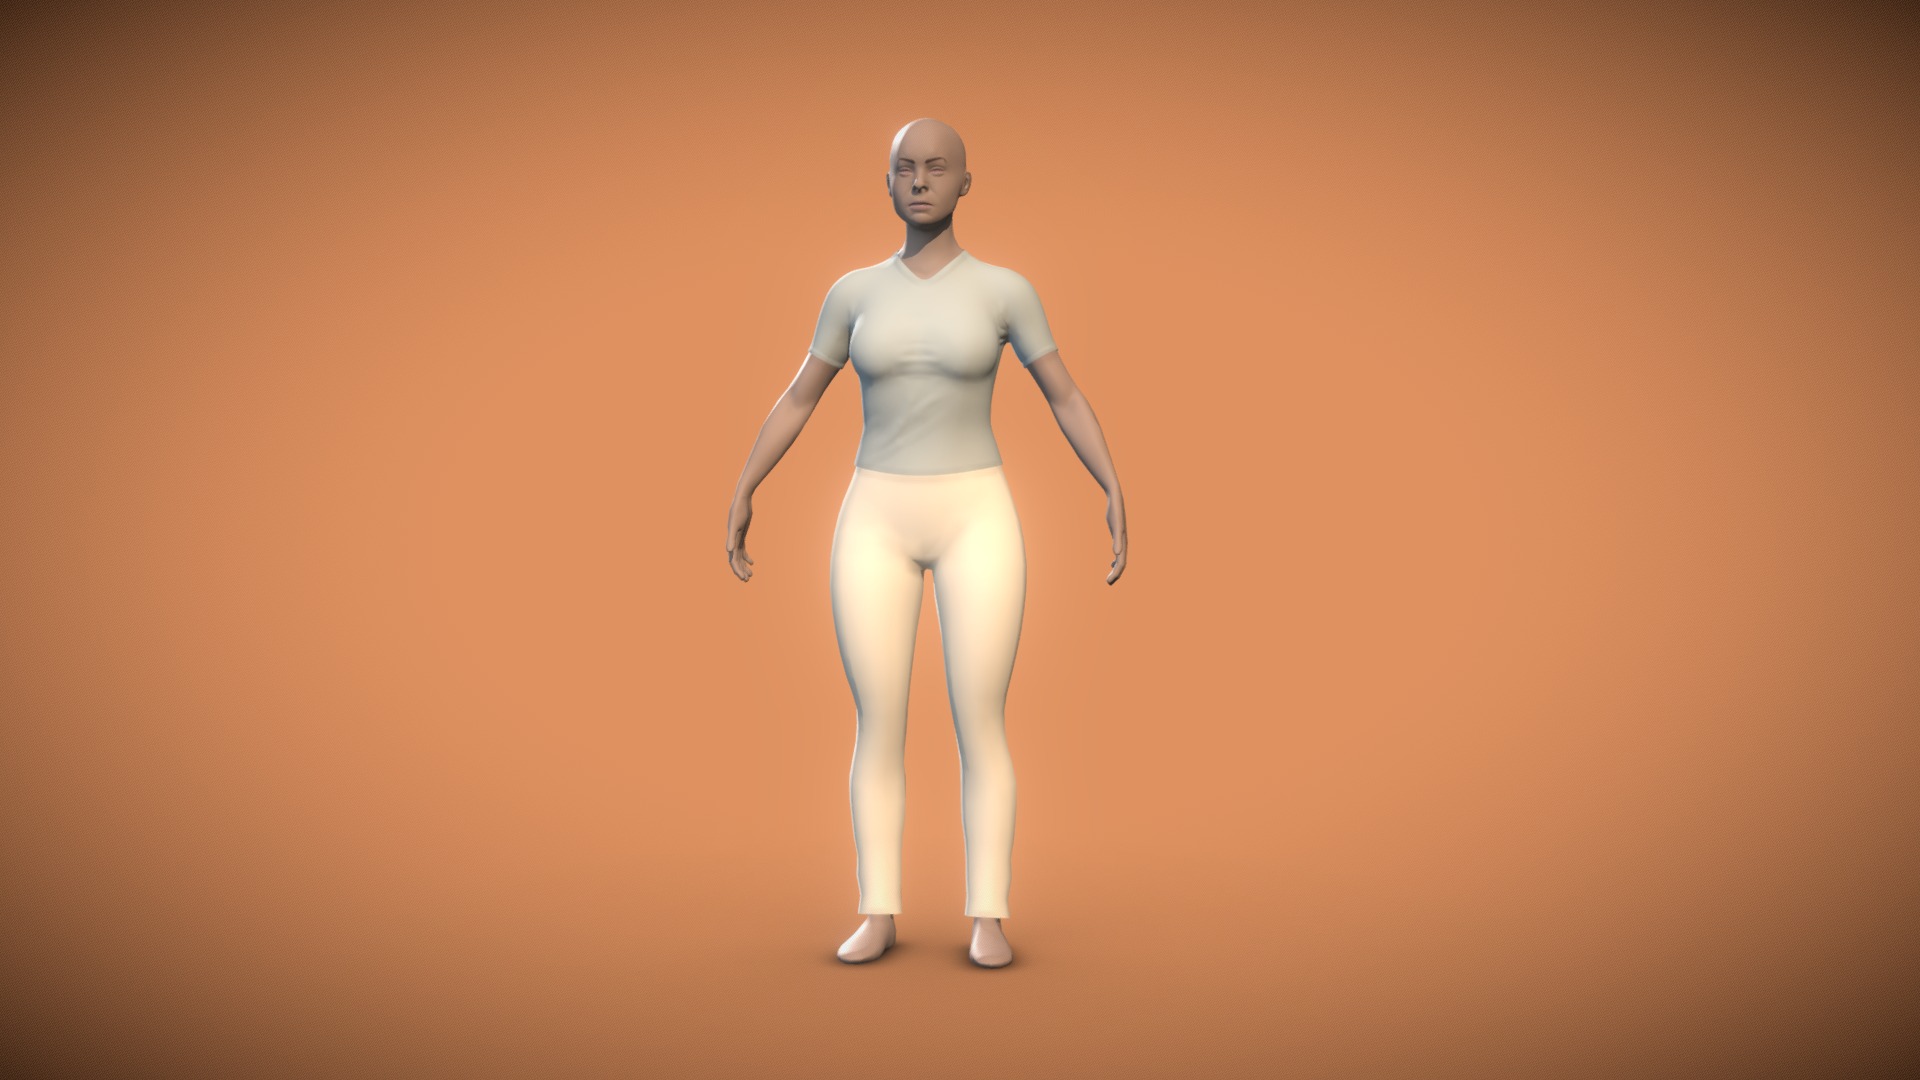 3D model Final - This is a 3D model of the Final. The 3D model is about a mannequin wearing a white outfit.